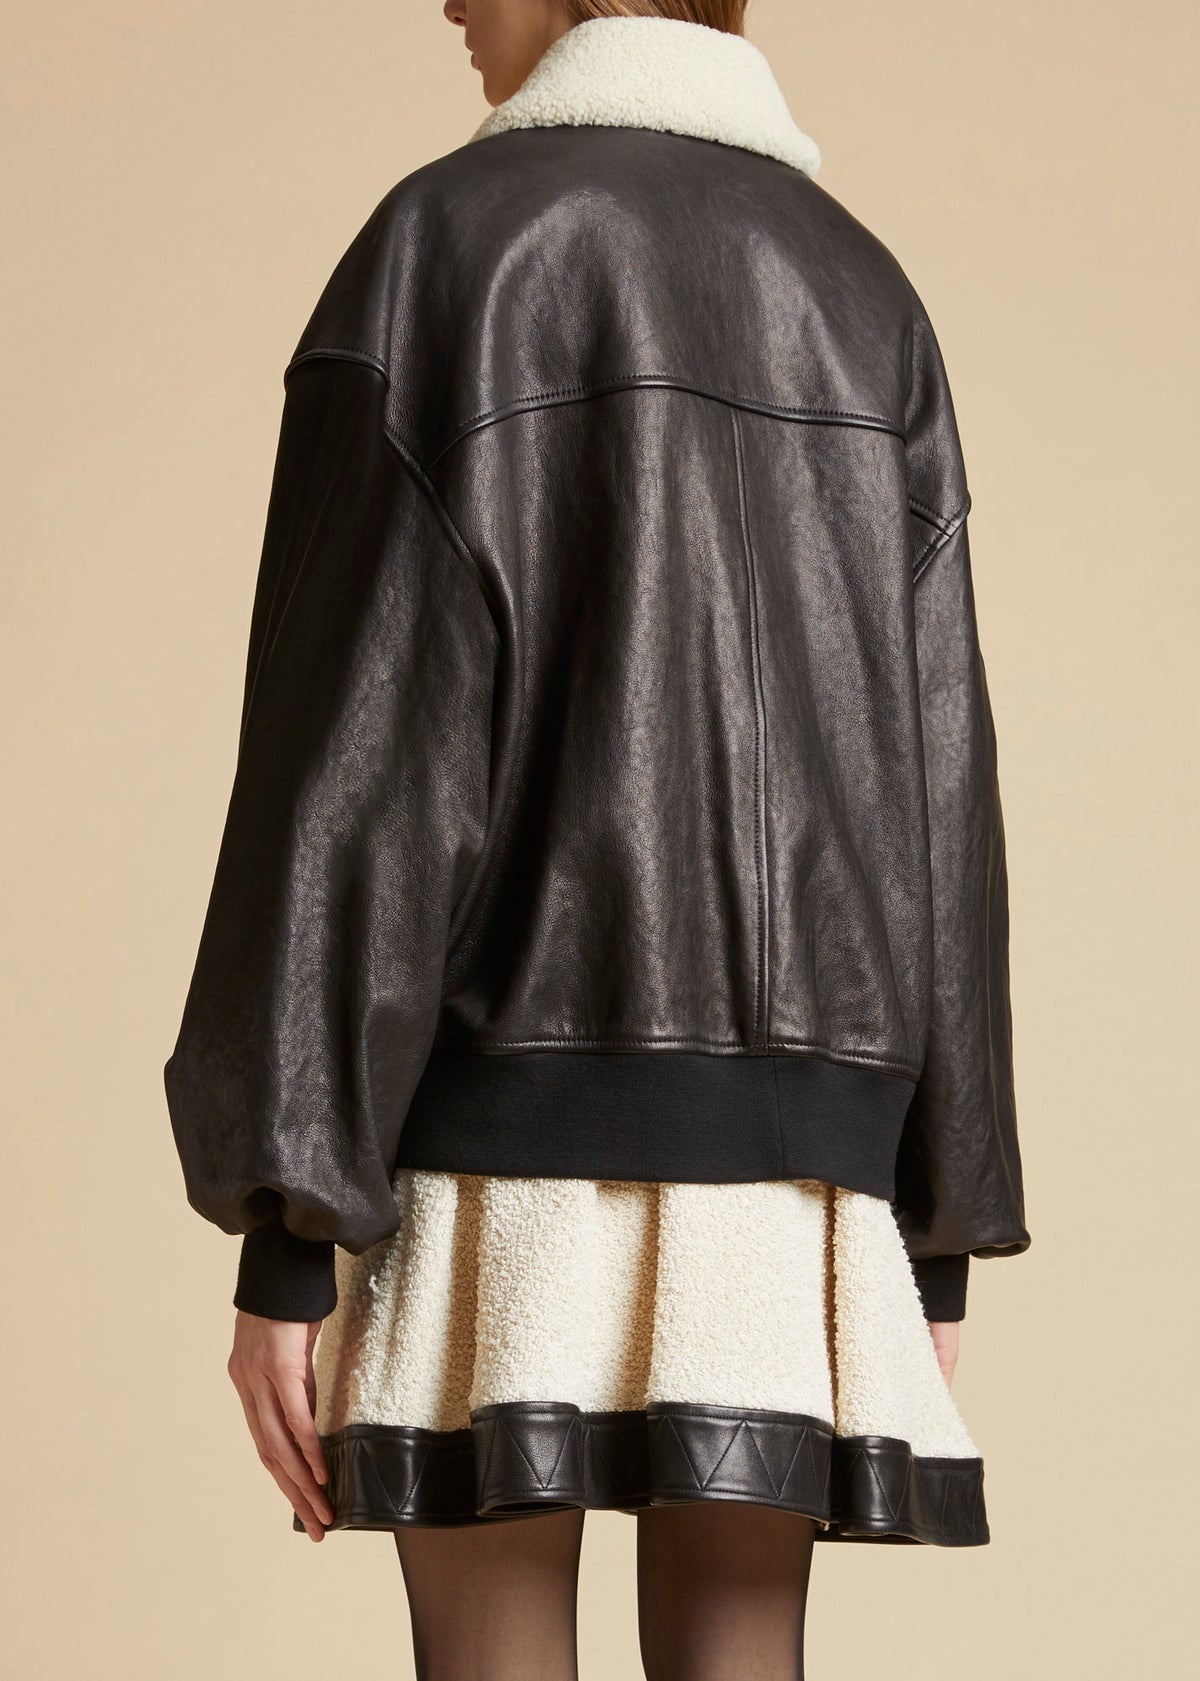 The Shellar Jacket in Black Leather - 3